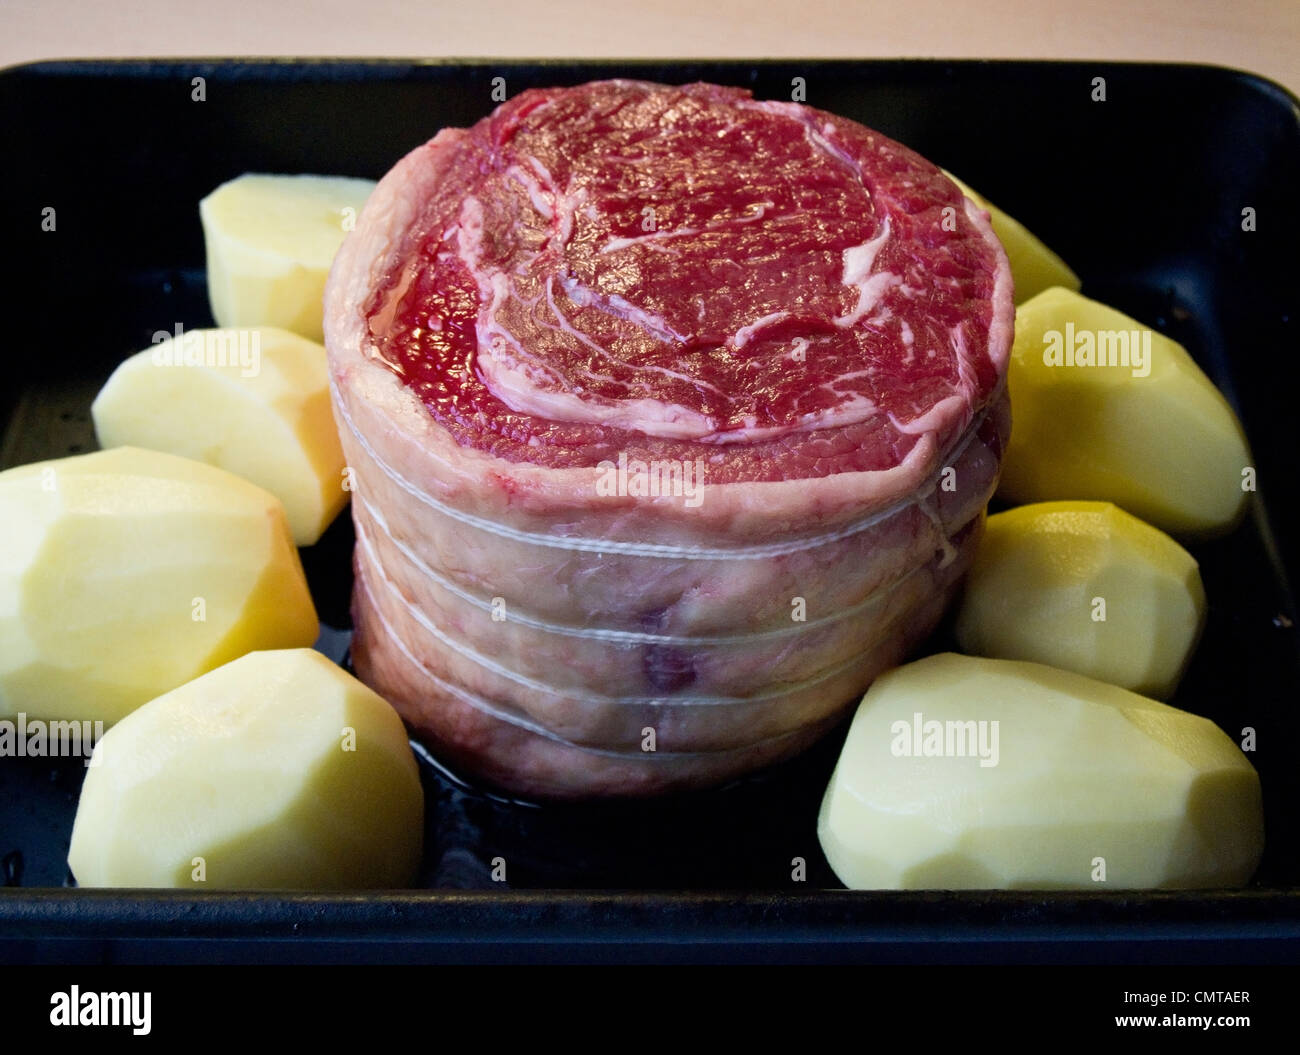 A beef rib roast cut ready for cooking, with potatoes in a pan Stock Photo